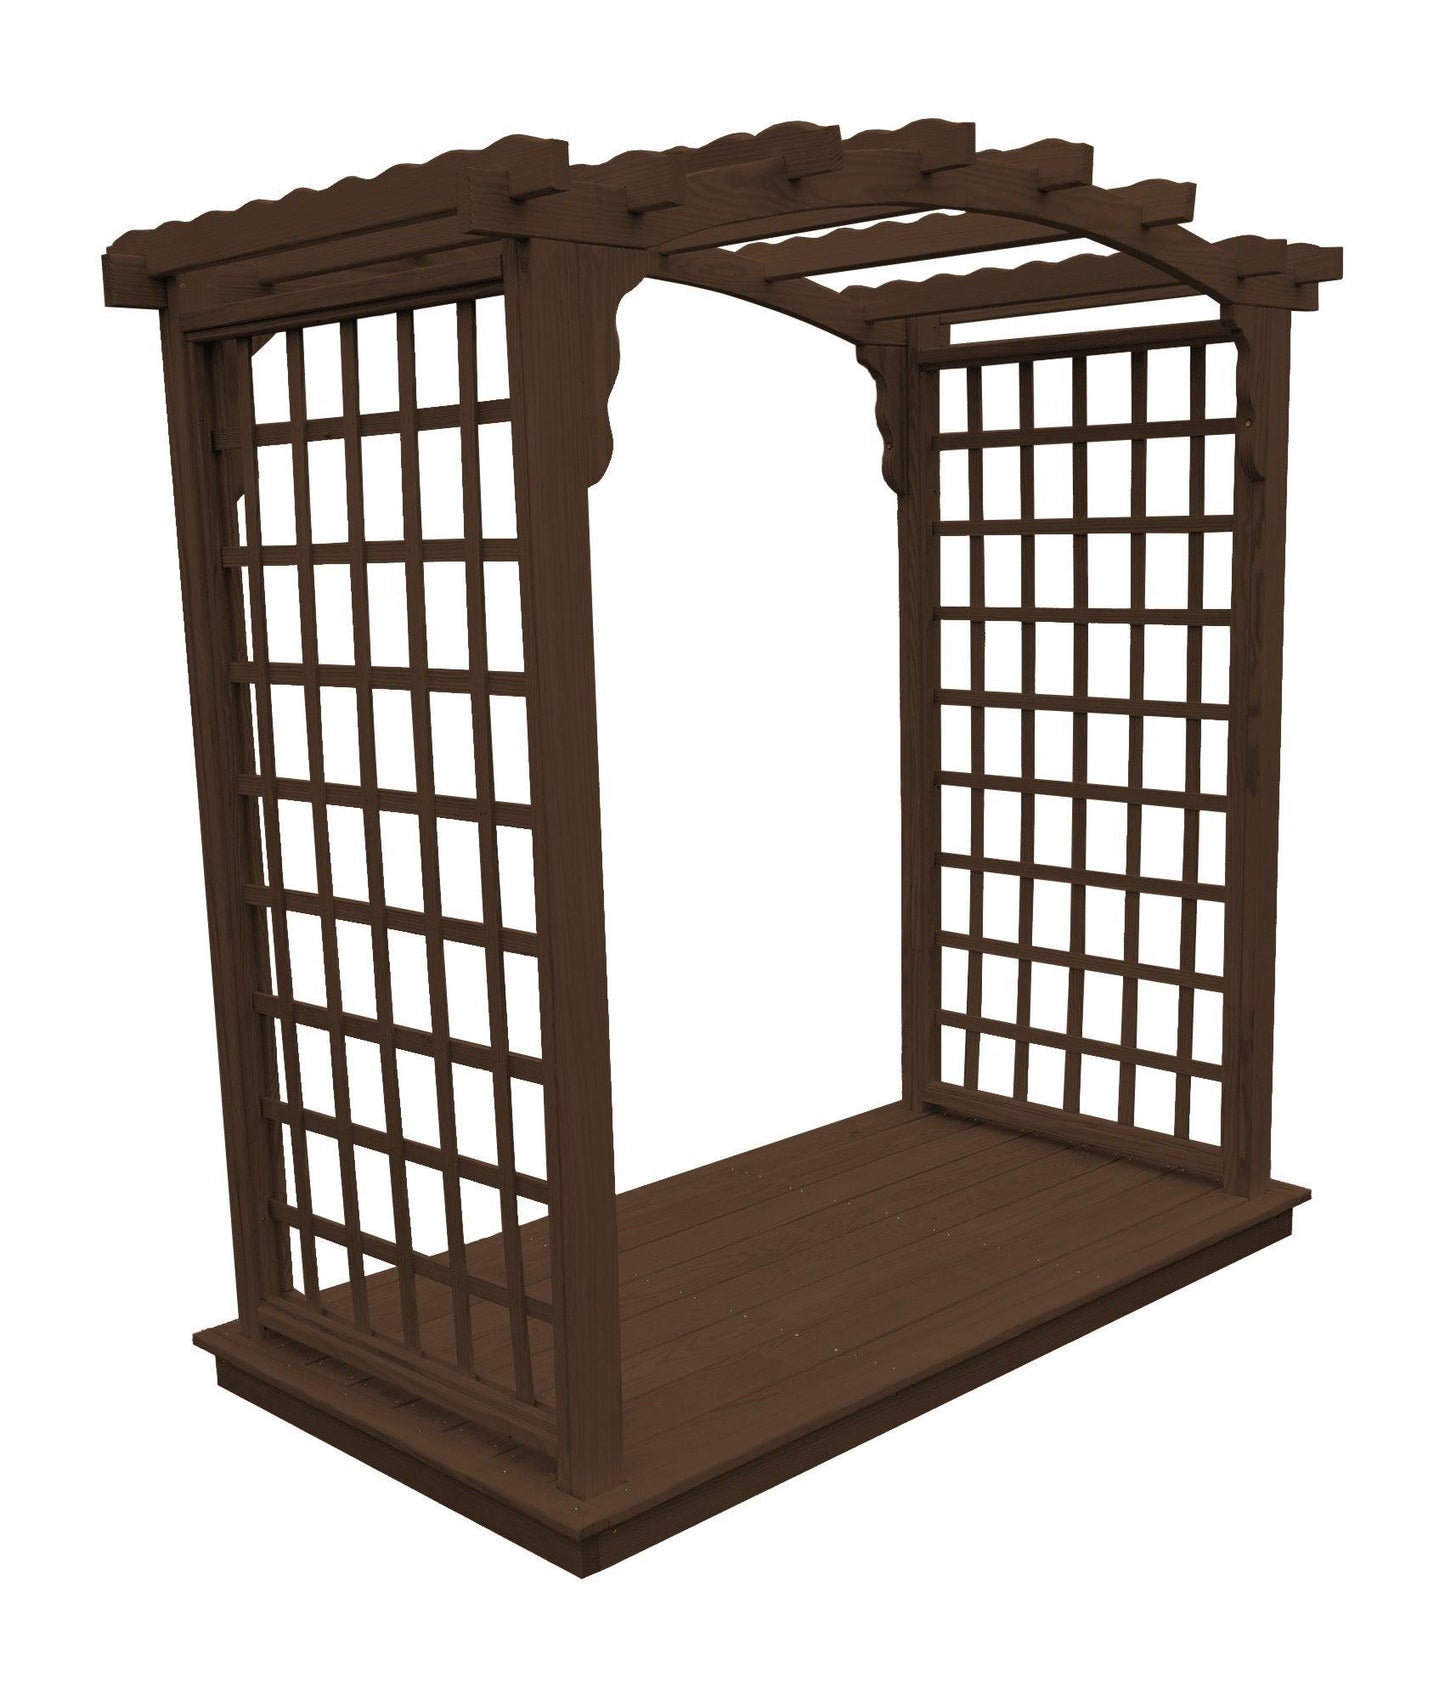 A&L FURNITURE CO. 6' Cambridge Pressure Treated Pine Arbor & Deck - LEAD TIME TO SHIP 10 BUSINESS DAYS